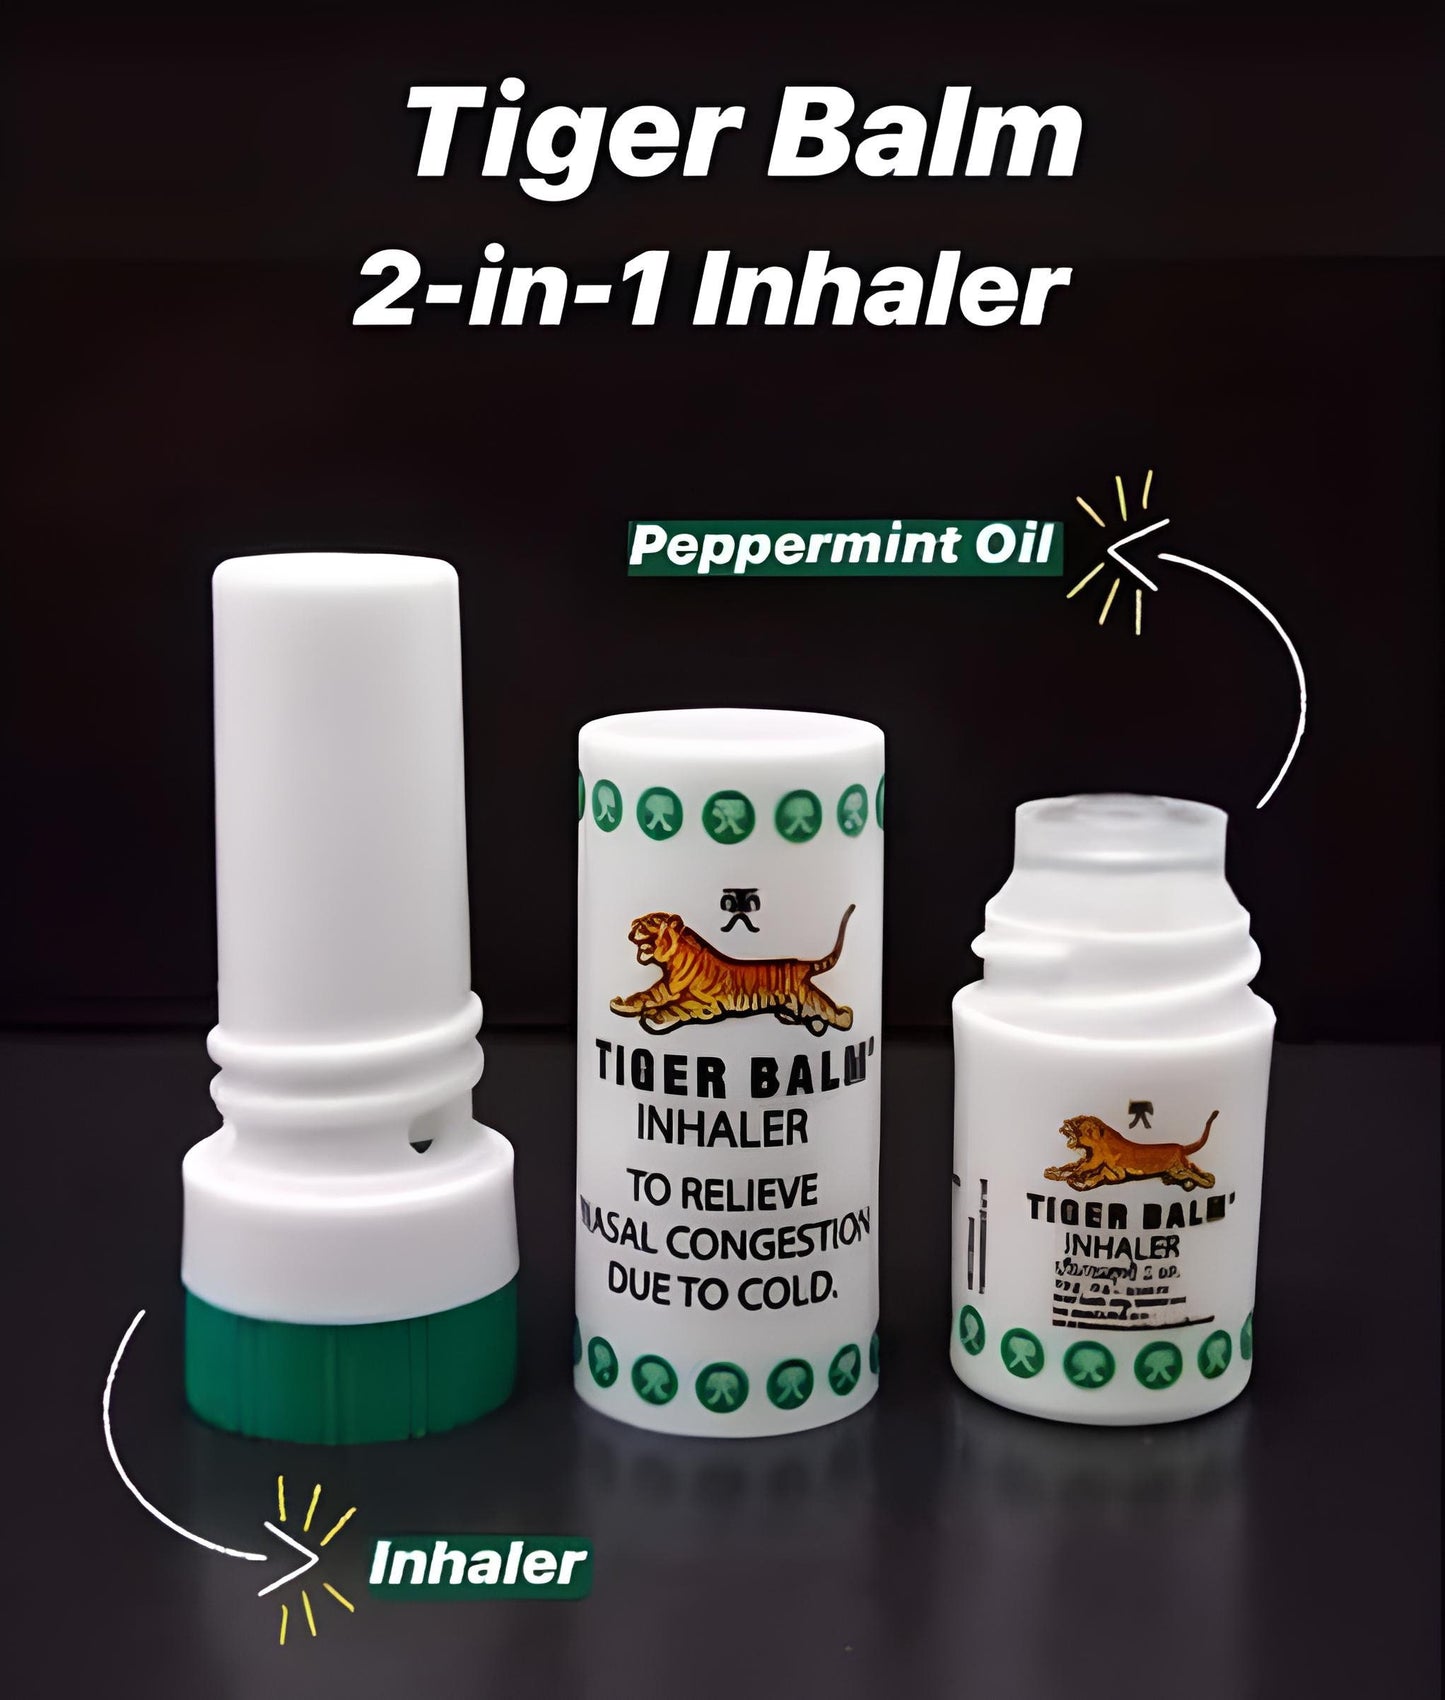 6X Tiger Balm Menthol Nasal Inhalers - Refreshing and Revitalizing Aromatherapy for On-the-Go Relief - Natural Menthol Sensation